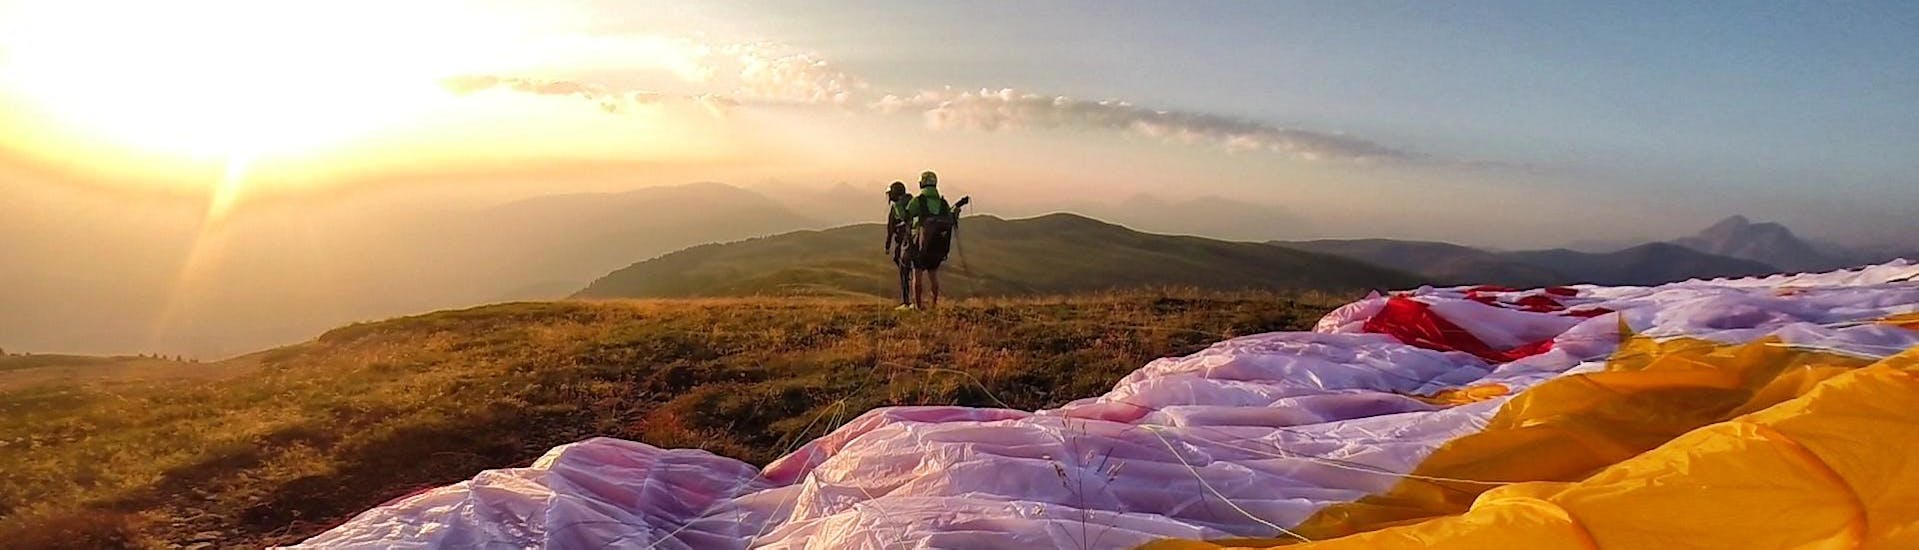 Tandem Paragliding in Val Pusteria - Hike & Fly at Sunrise.